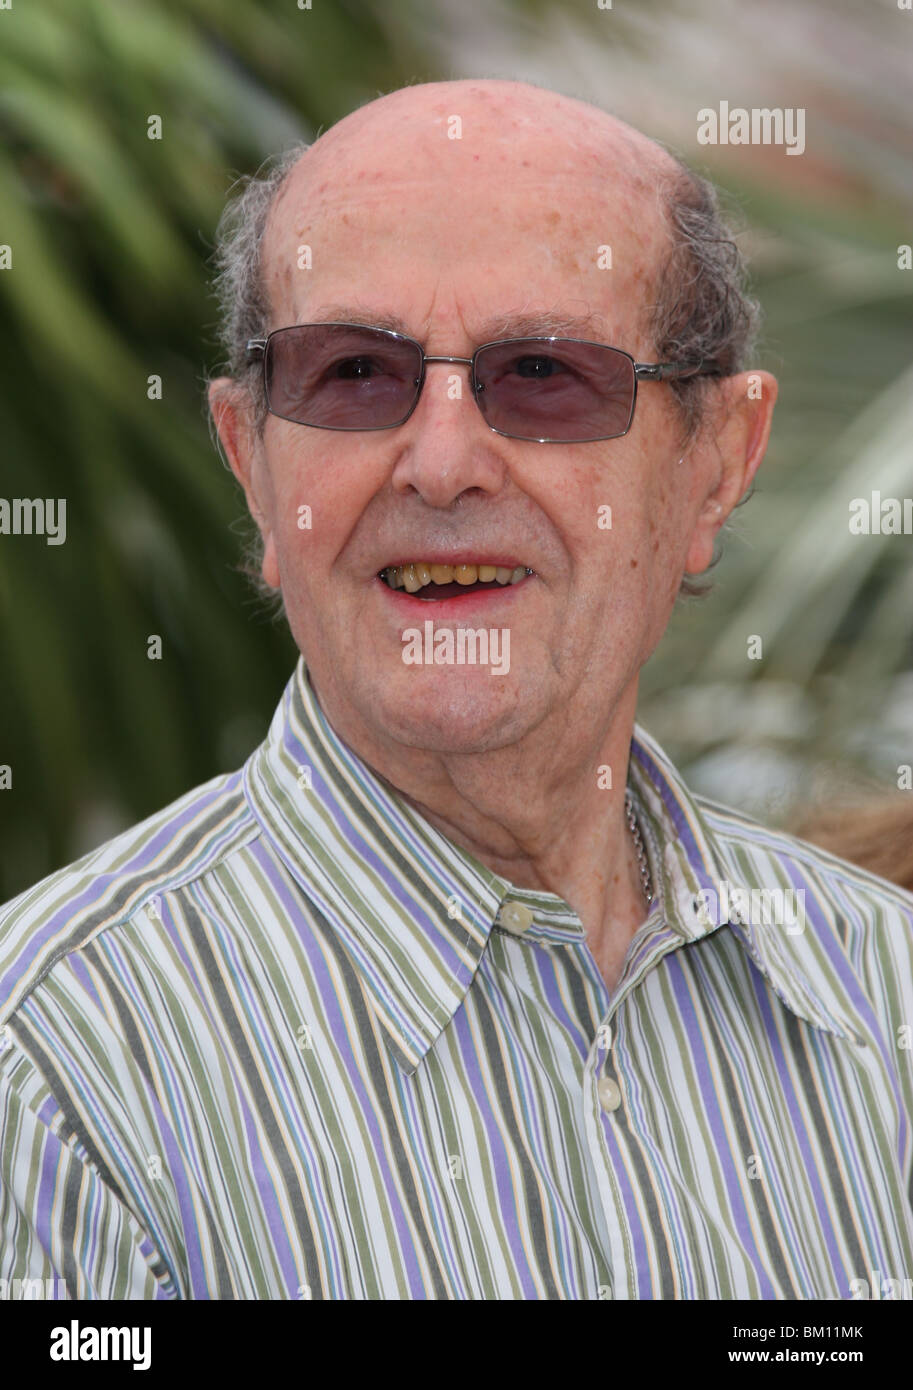 MANOEL DE OLIVEIRA THE STRANGE CASE OF ANGELICA PHOTOCALL CANNES FILM FESTIVAL 2010 PALAIS DES FESTIVAL CANNES FRANCE 13 May Stock Photo